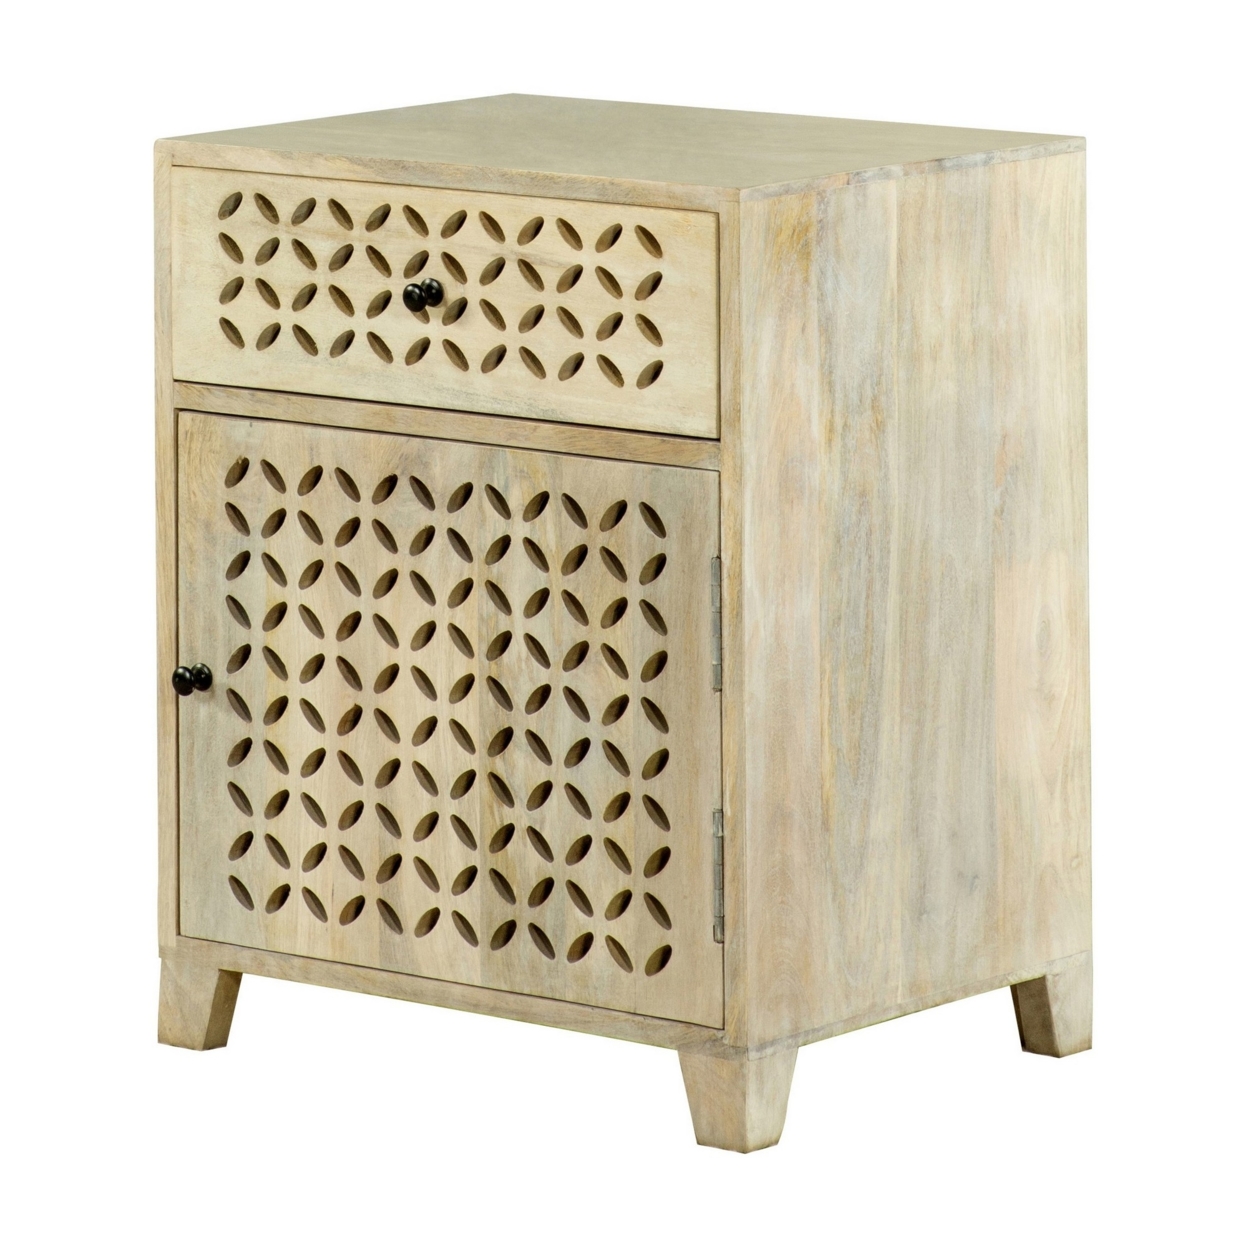 22 Inch 1 Drawer Accent Cabinet, Lattice Cut Outs On Front, Whitewash Wood- Saltoro Sherpi